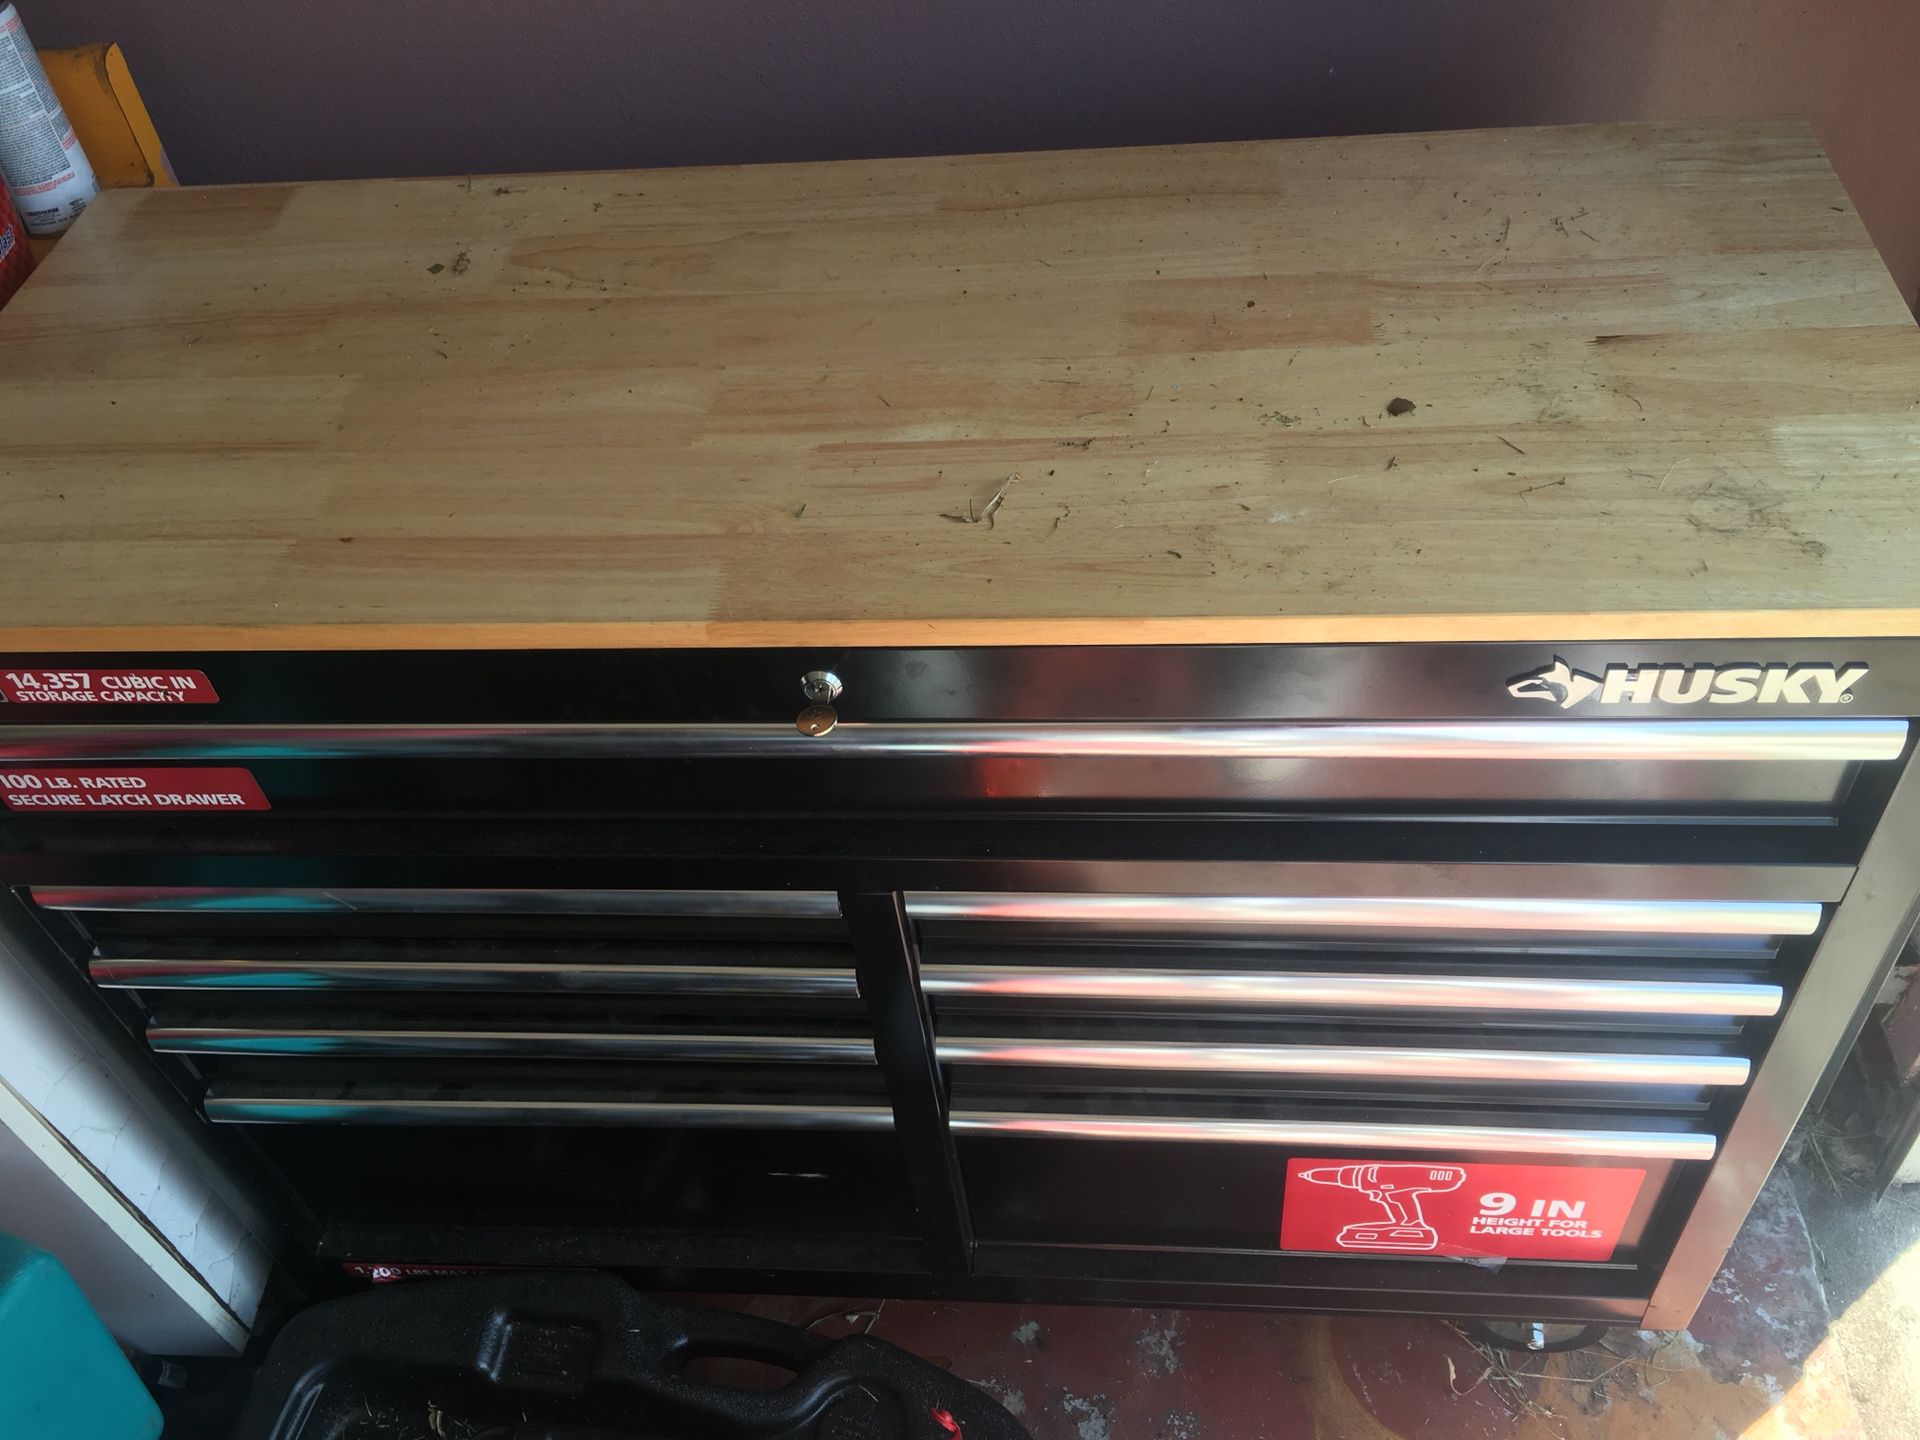 New tool box with tools.